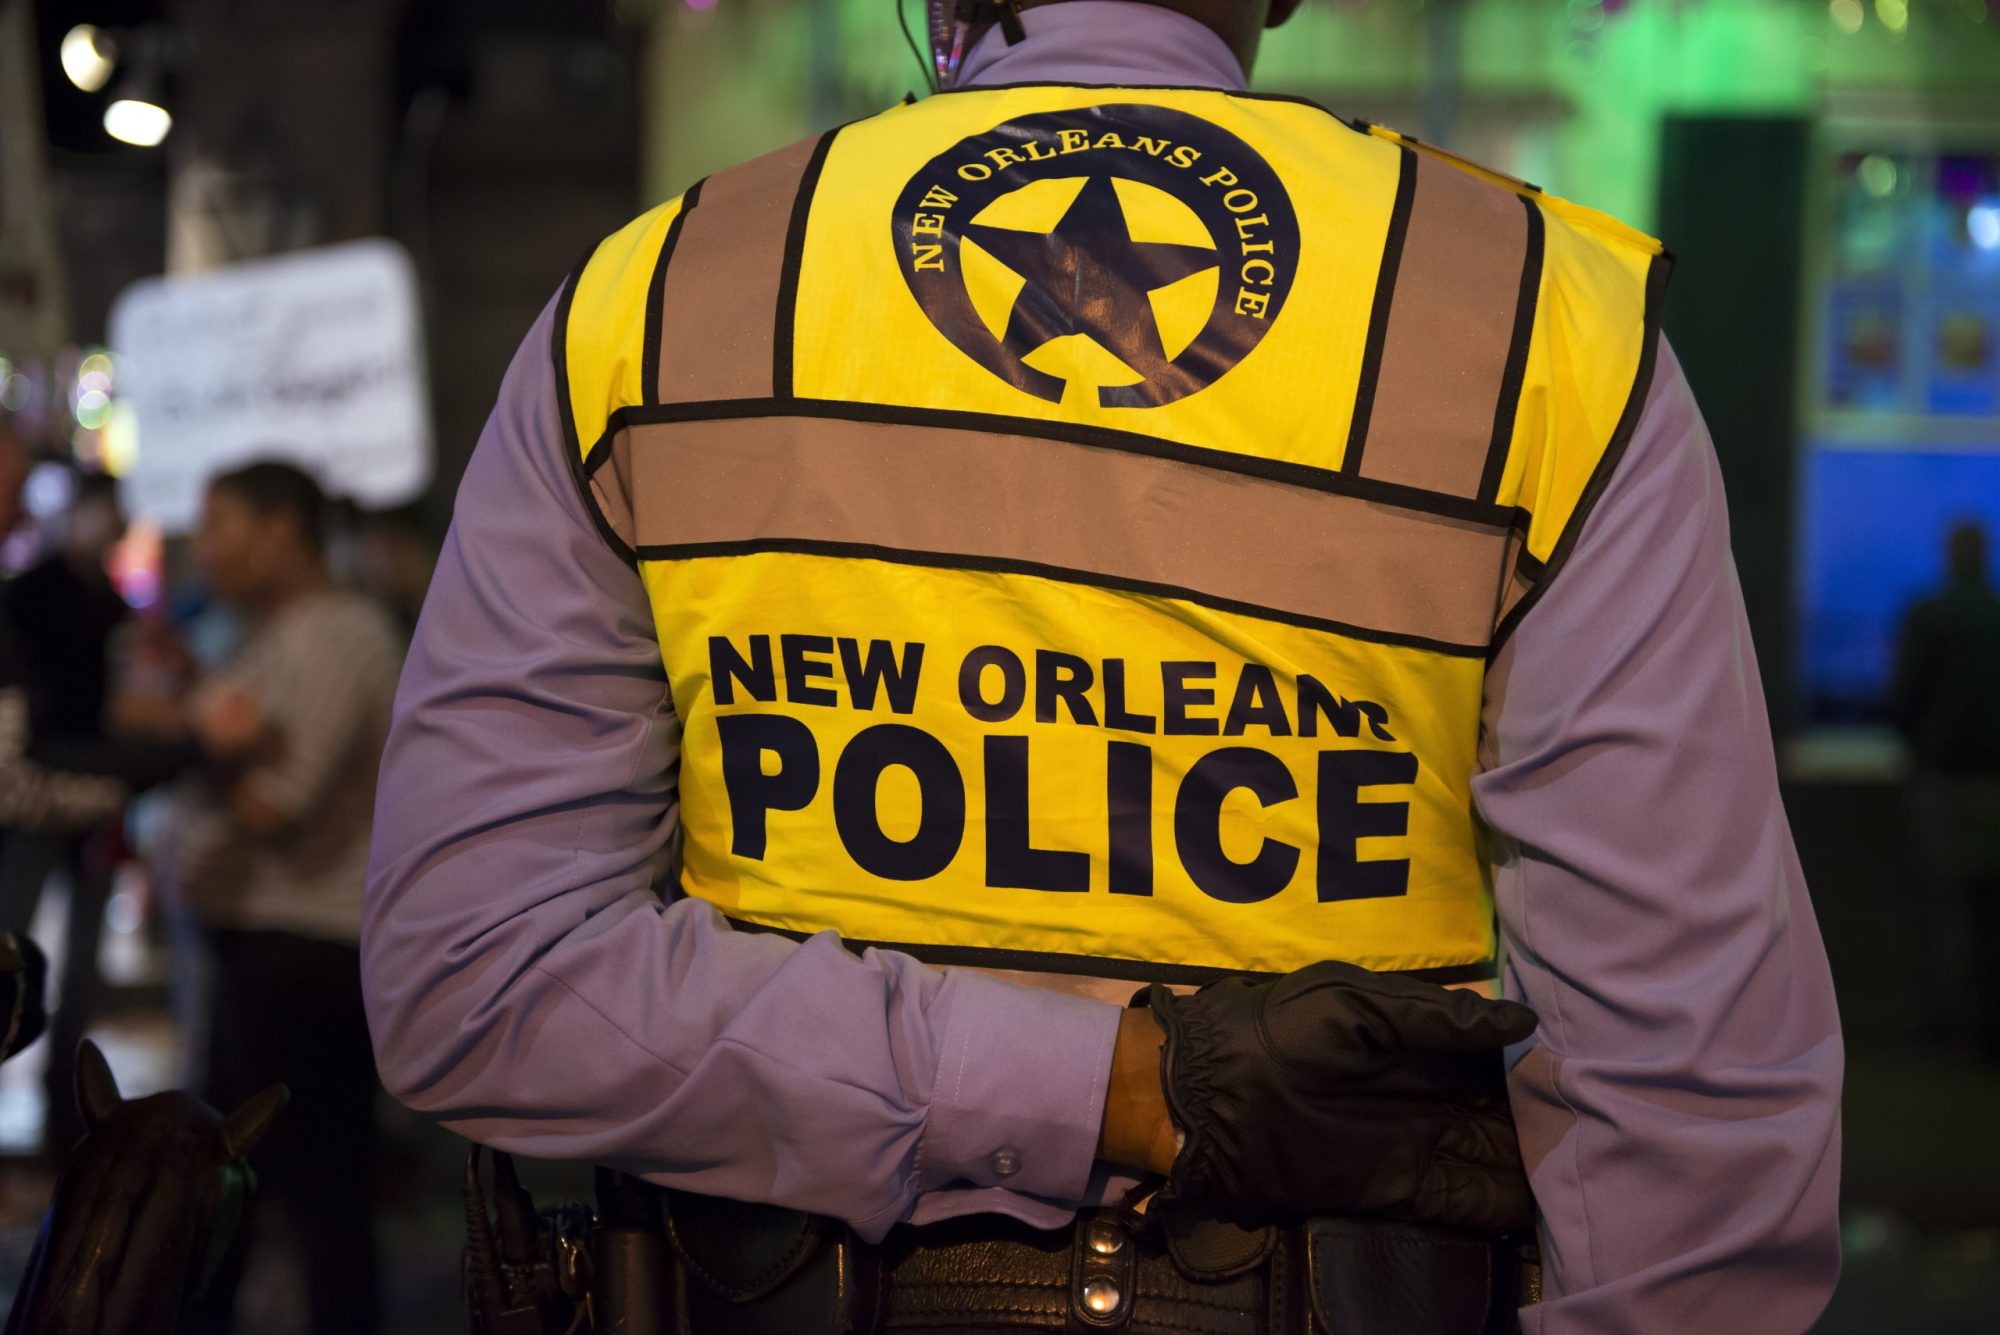 The back of a uniformed police officer wearing a vest that reads "New Orleans Police"